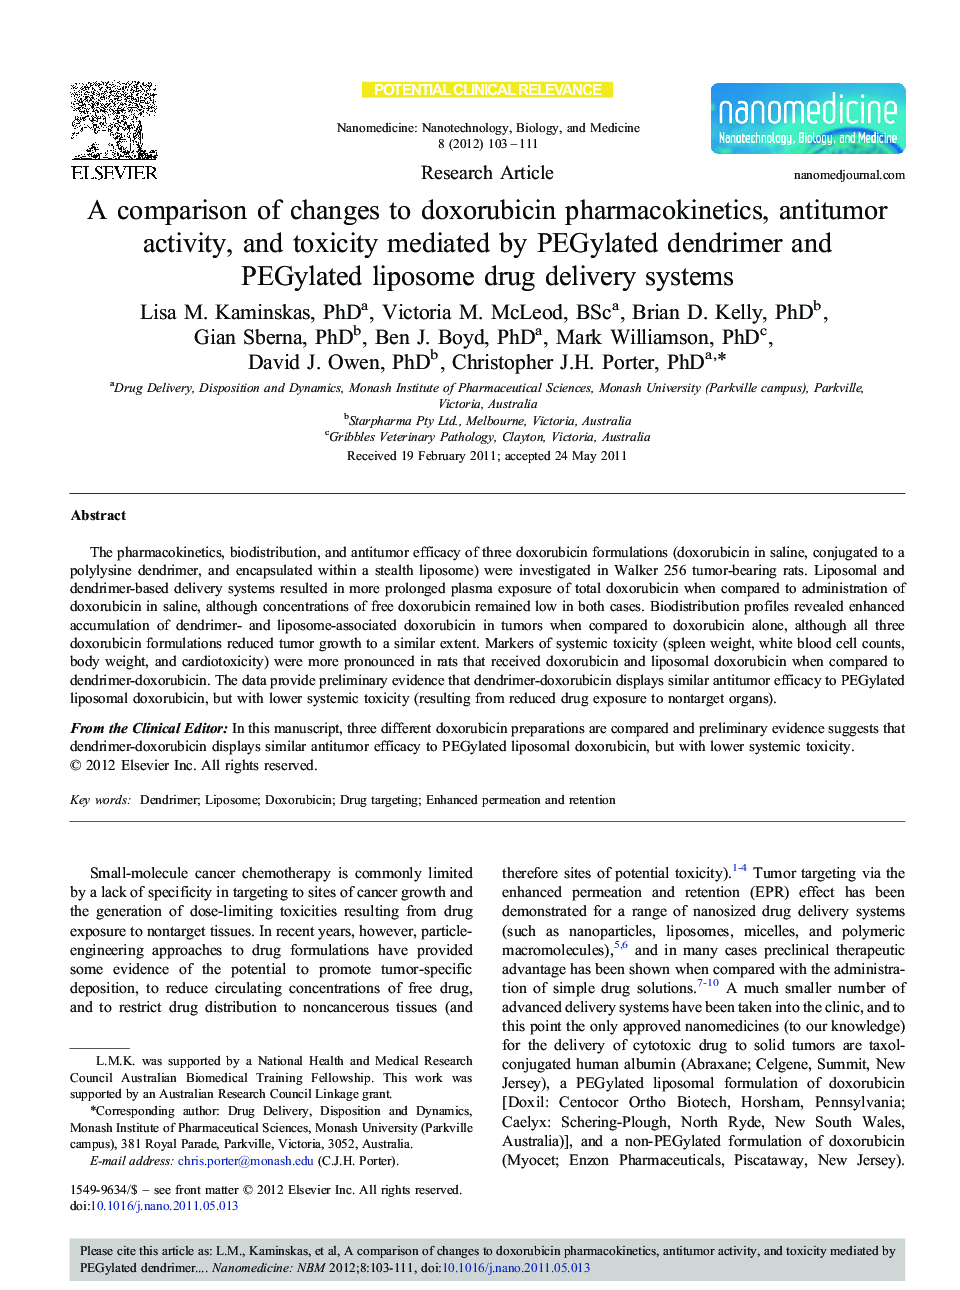 A comparison of changes to doxorubicin pharmacokinetics, antitumor activity, and toxicity mediated by PEGylated dendrimer and PEGylated liposome drug delivery systems 